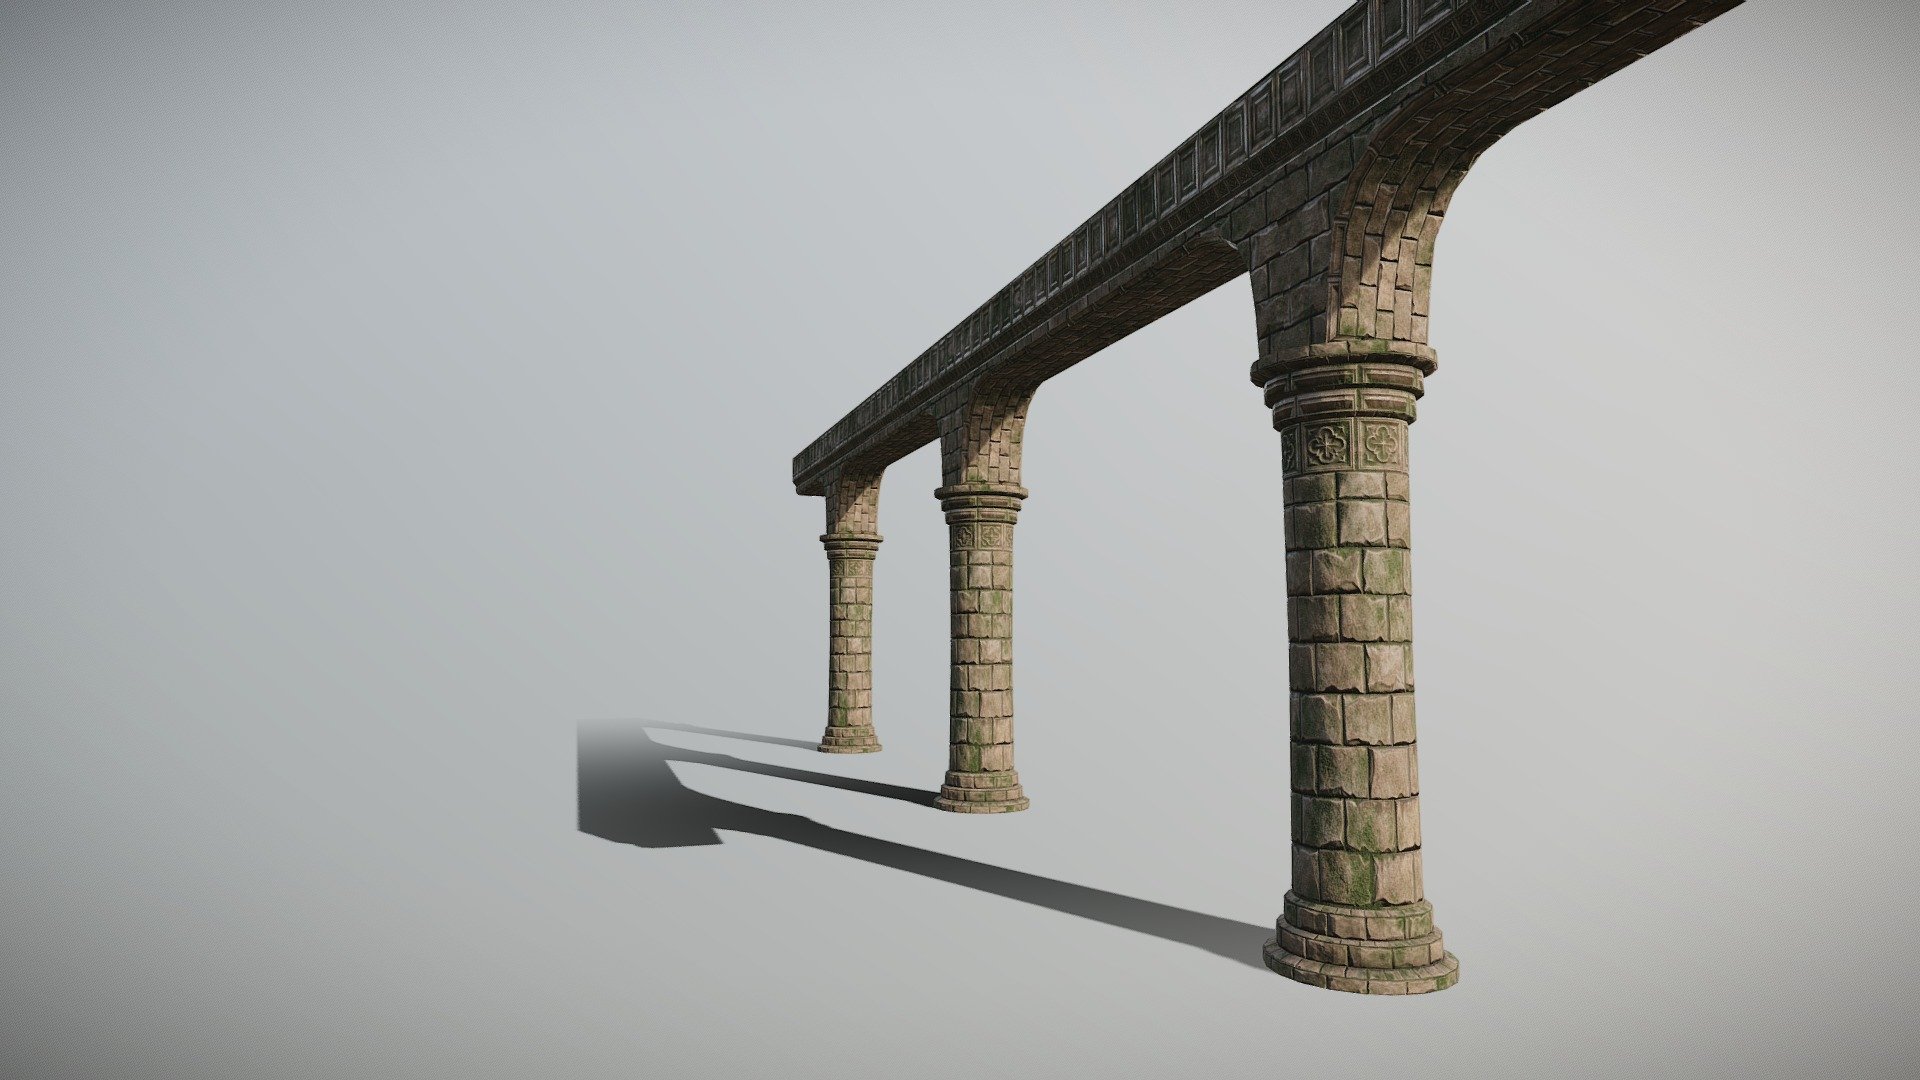 Modular asset with trim texture

Details

Game ready asset with LODs

3 variations

Trim texture

Textures are 4K resolution

Contact me for any issue or questions! https://www.artstation.com/bpaul/profile - Column (Trim Texture) - Buy Royalty Free 3D model by Paul (@nathan.d1563) 3d model